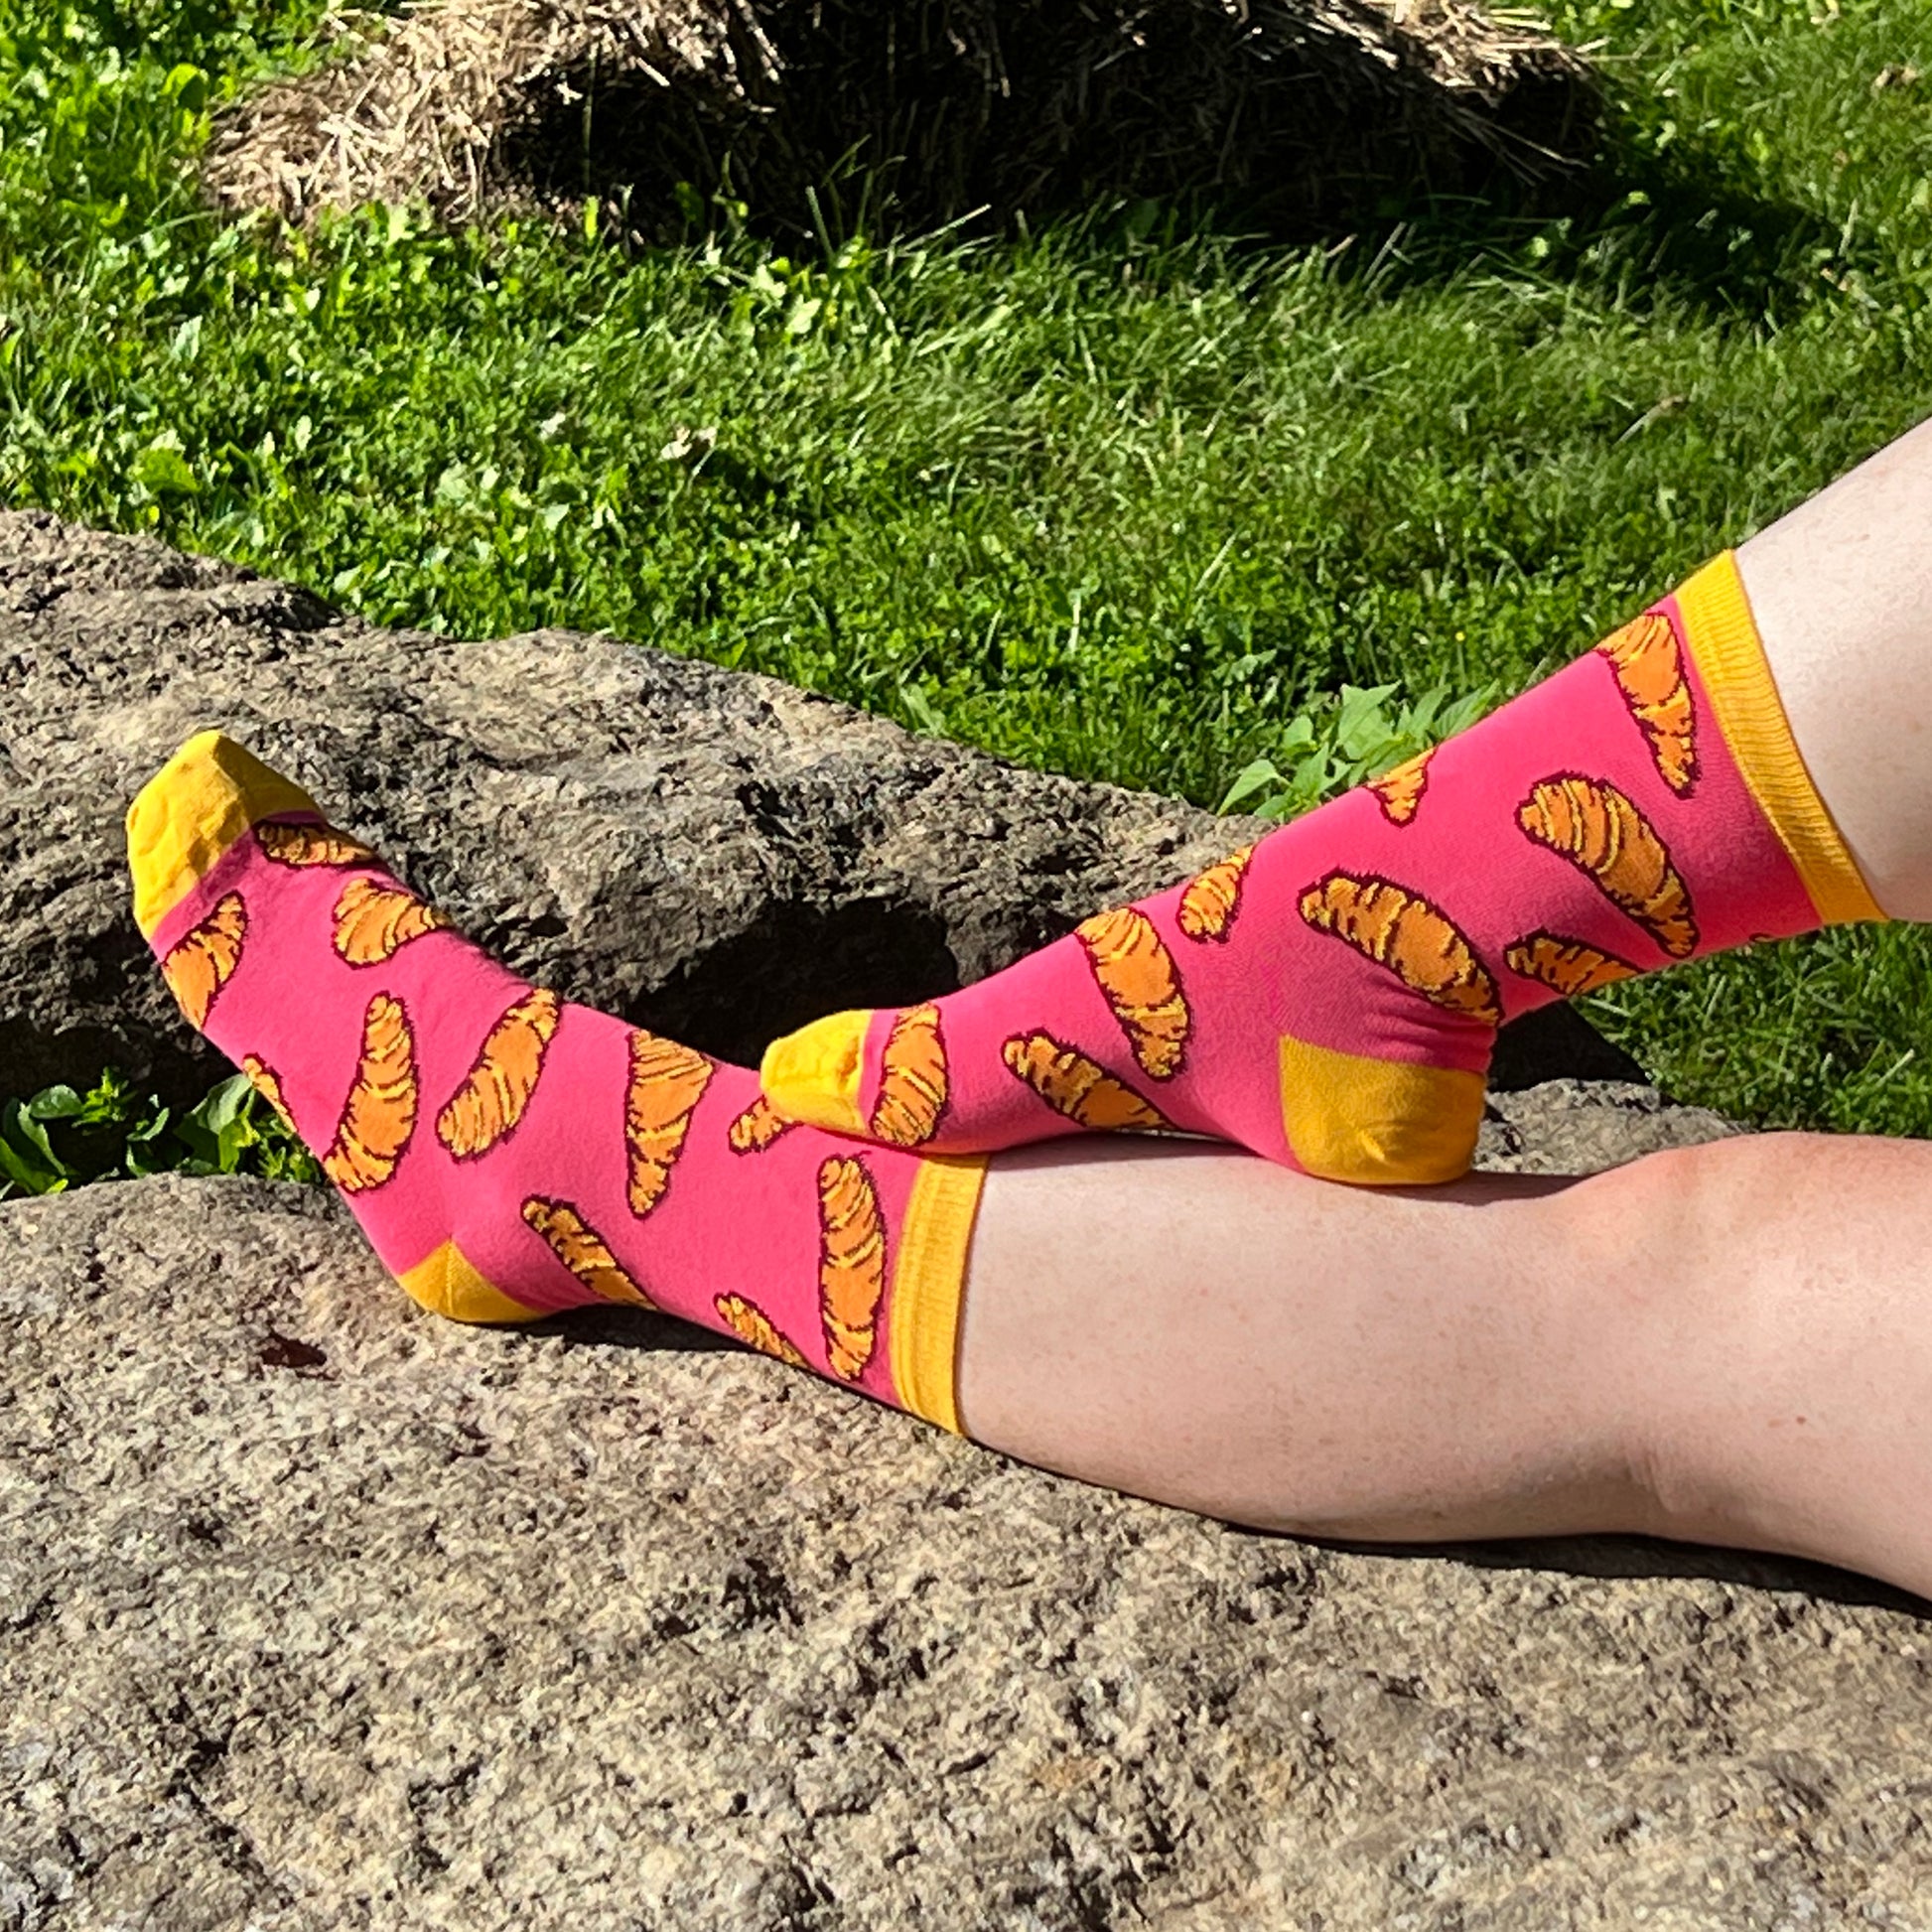 A pale, freckled pair of legs wears pink socks patterned with croissants with yellow cuffs, heel and toe. The legs are against a rock in a grassy background.